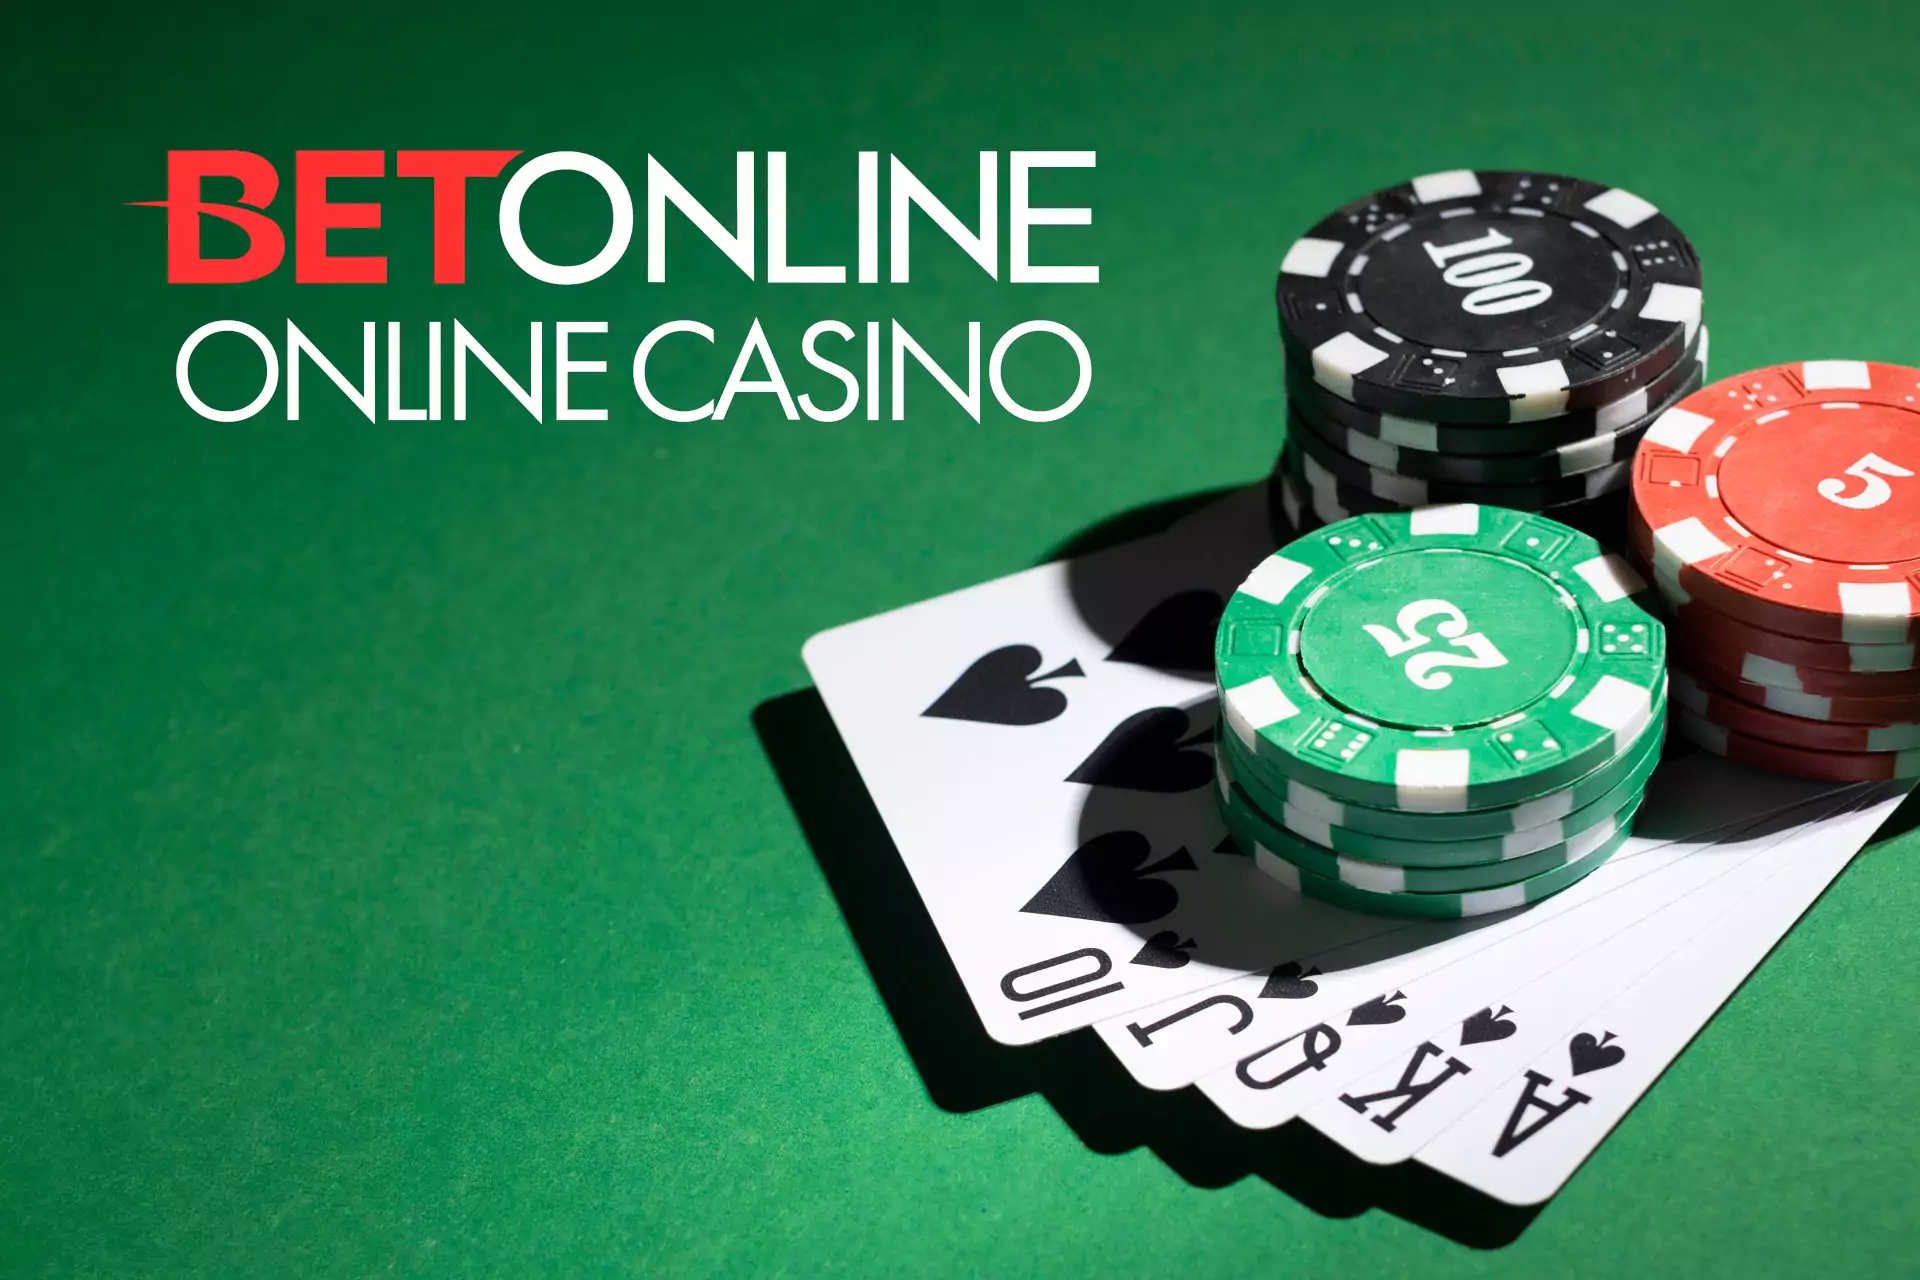 If you like to play casino games, go to the special section and try the BetOnline online games.